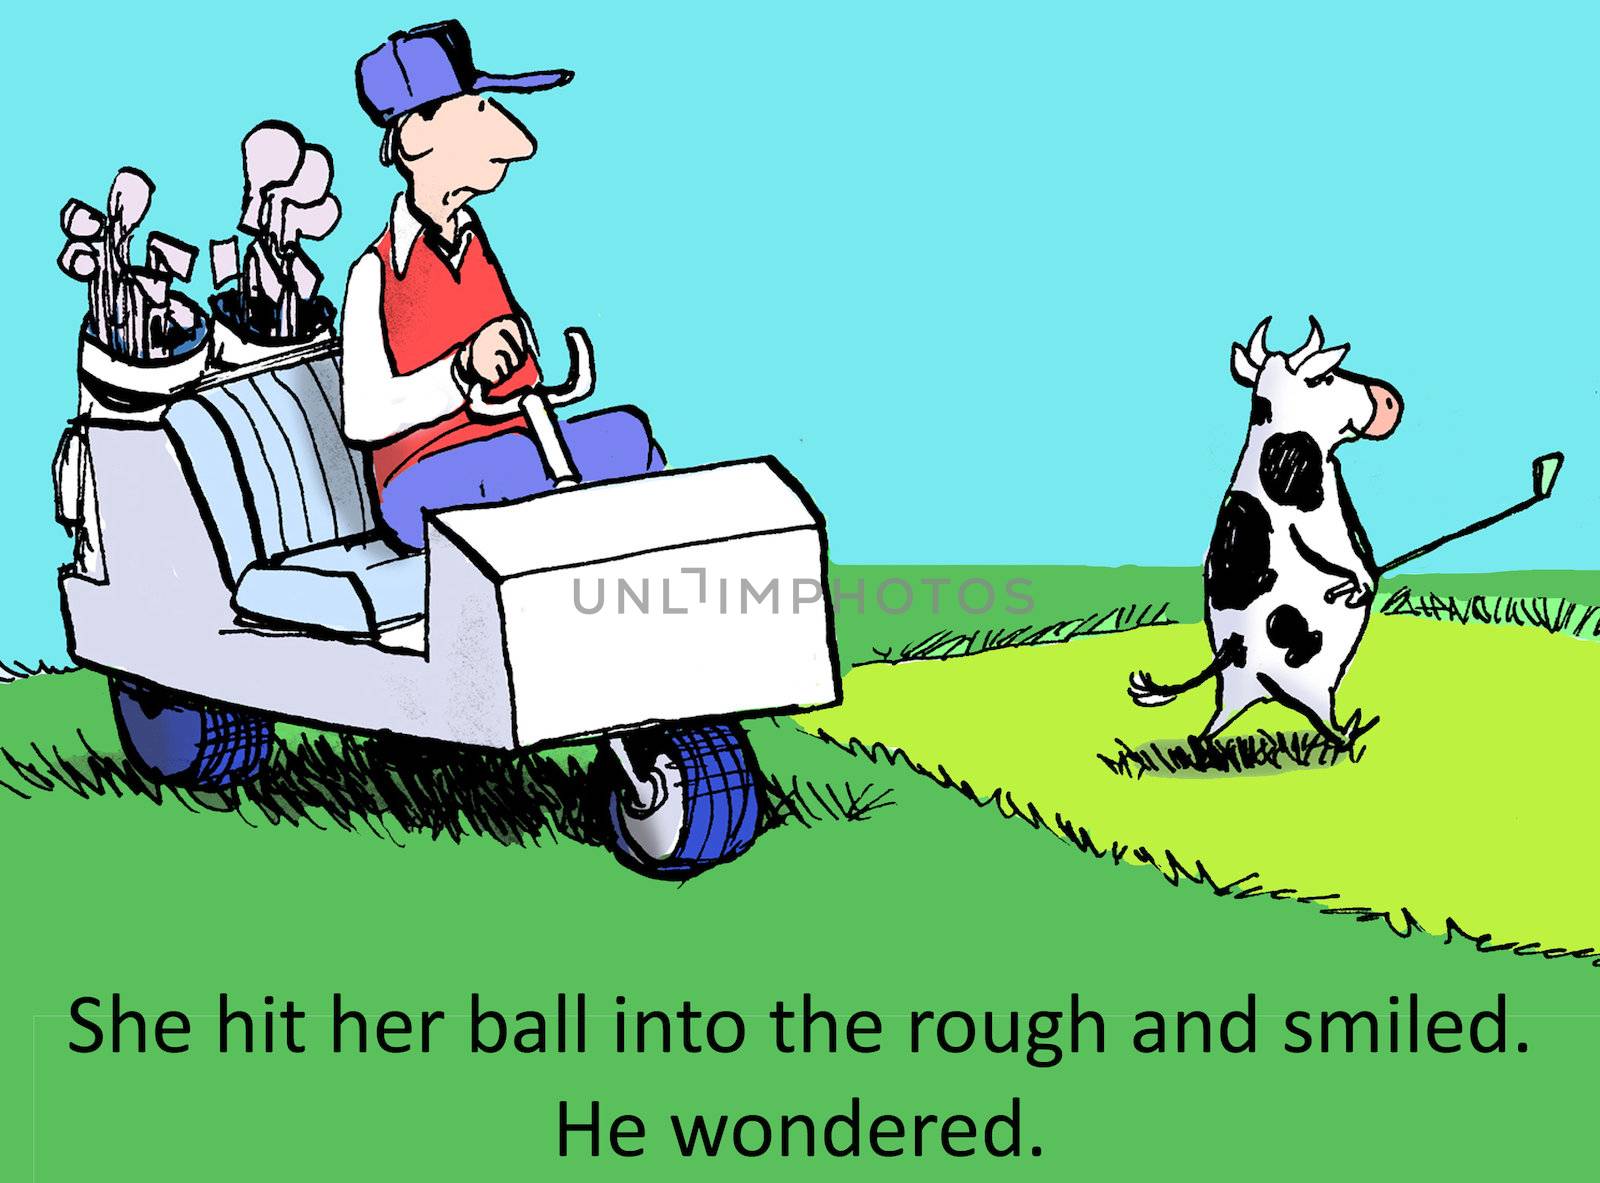 Golf and the Cow by andrewgenn